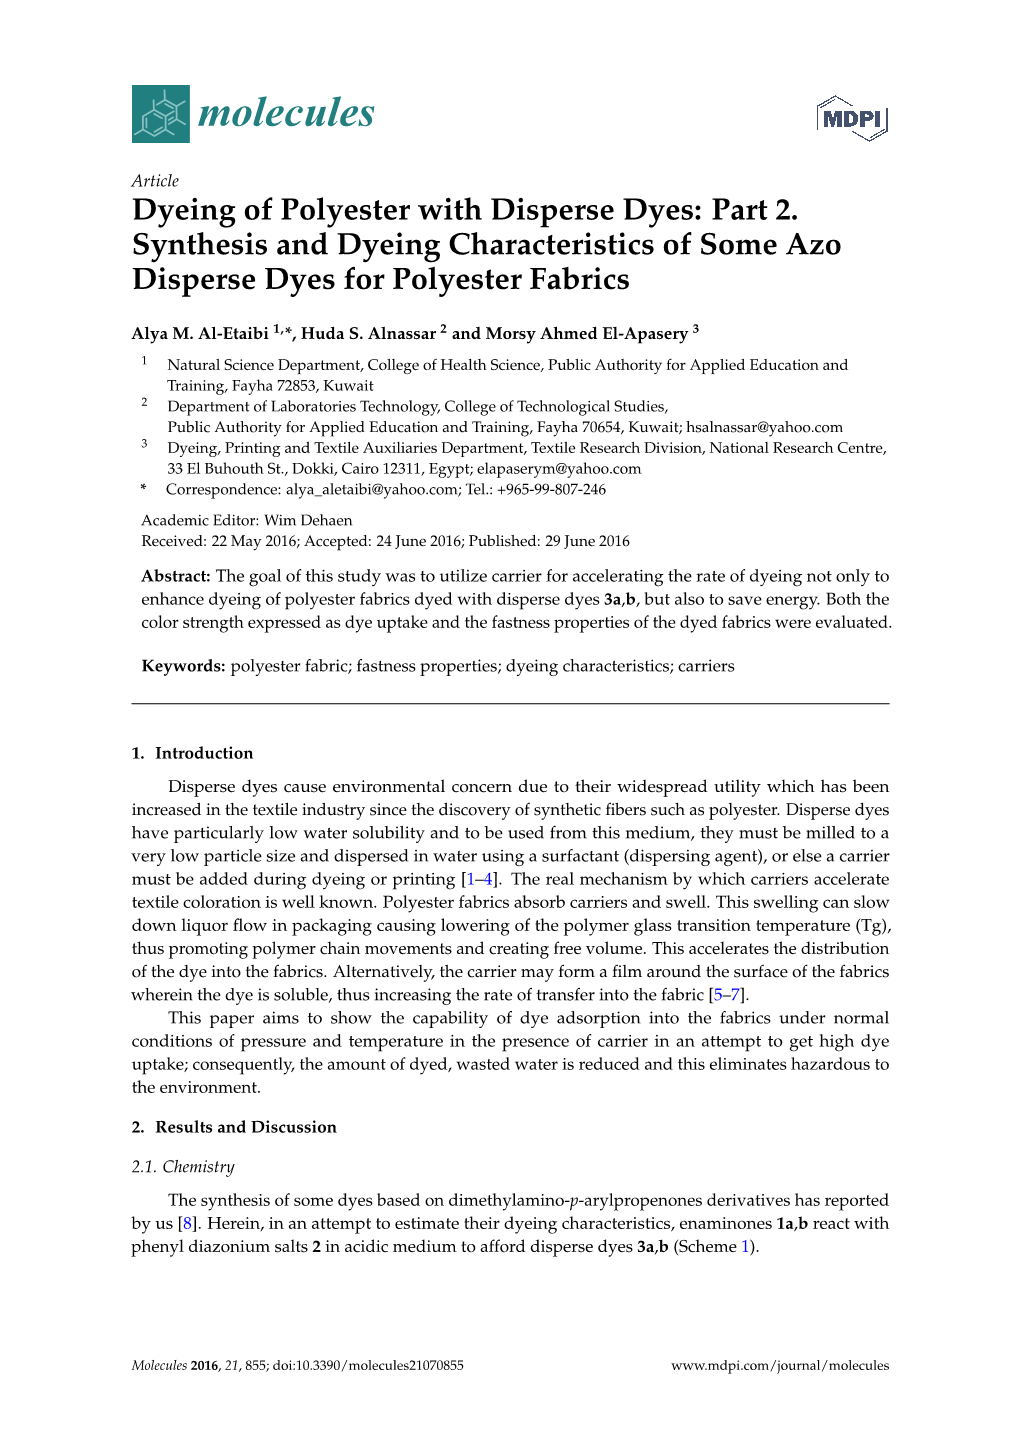 Dyeing of Polyester with Disperse Dyes: Part 2. Synthesis and Dyeing Characteristics of Some Azo Disperse Dyes for Polyester Fabrics